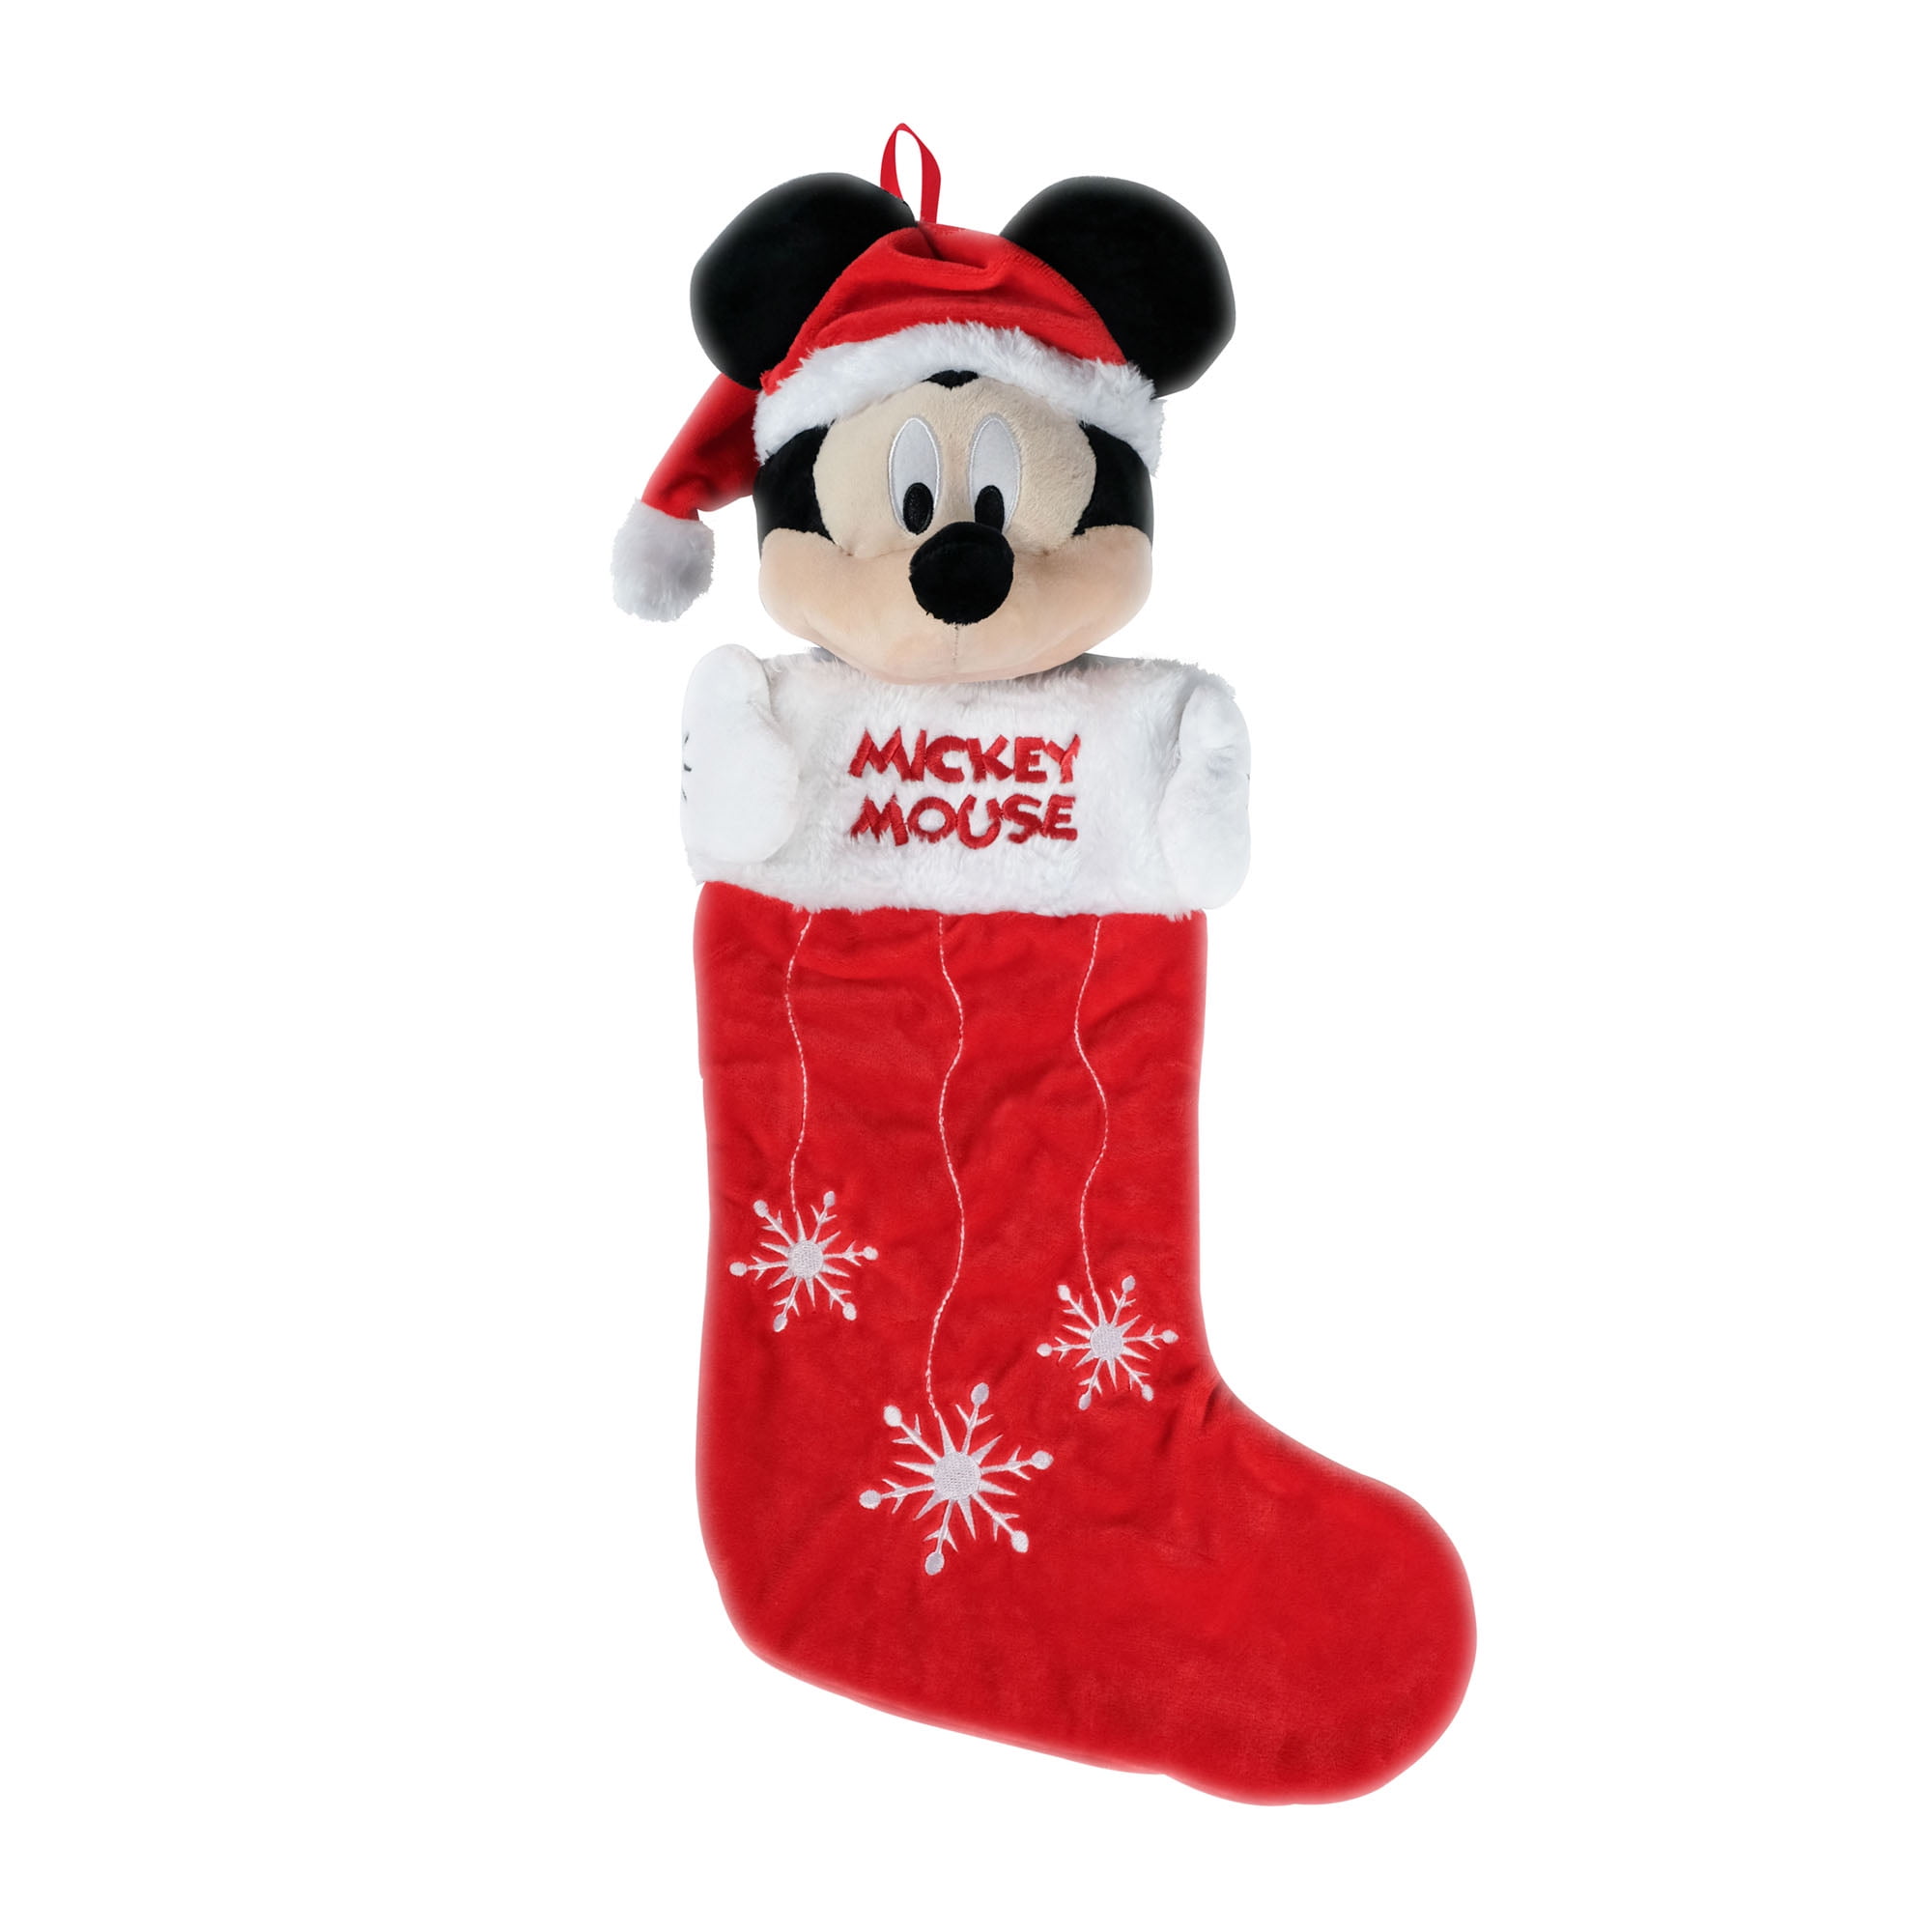 8.5" NEW Disney Mickey Mouse Christmas Stocking with Plush Cuff 